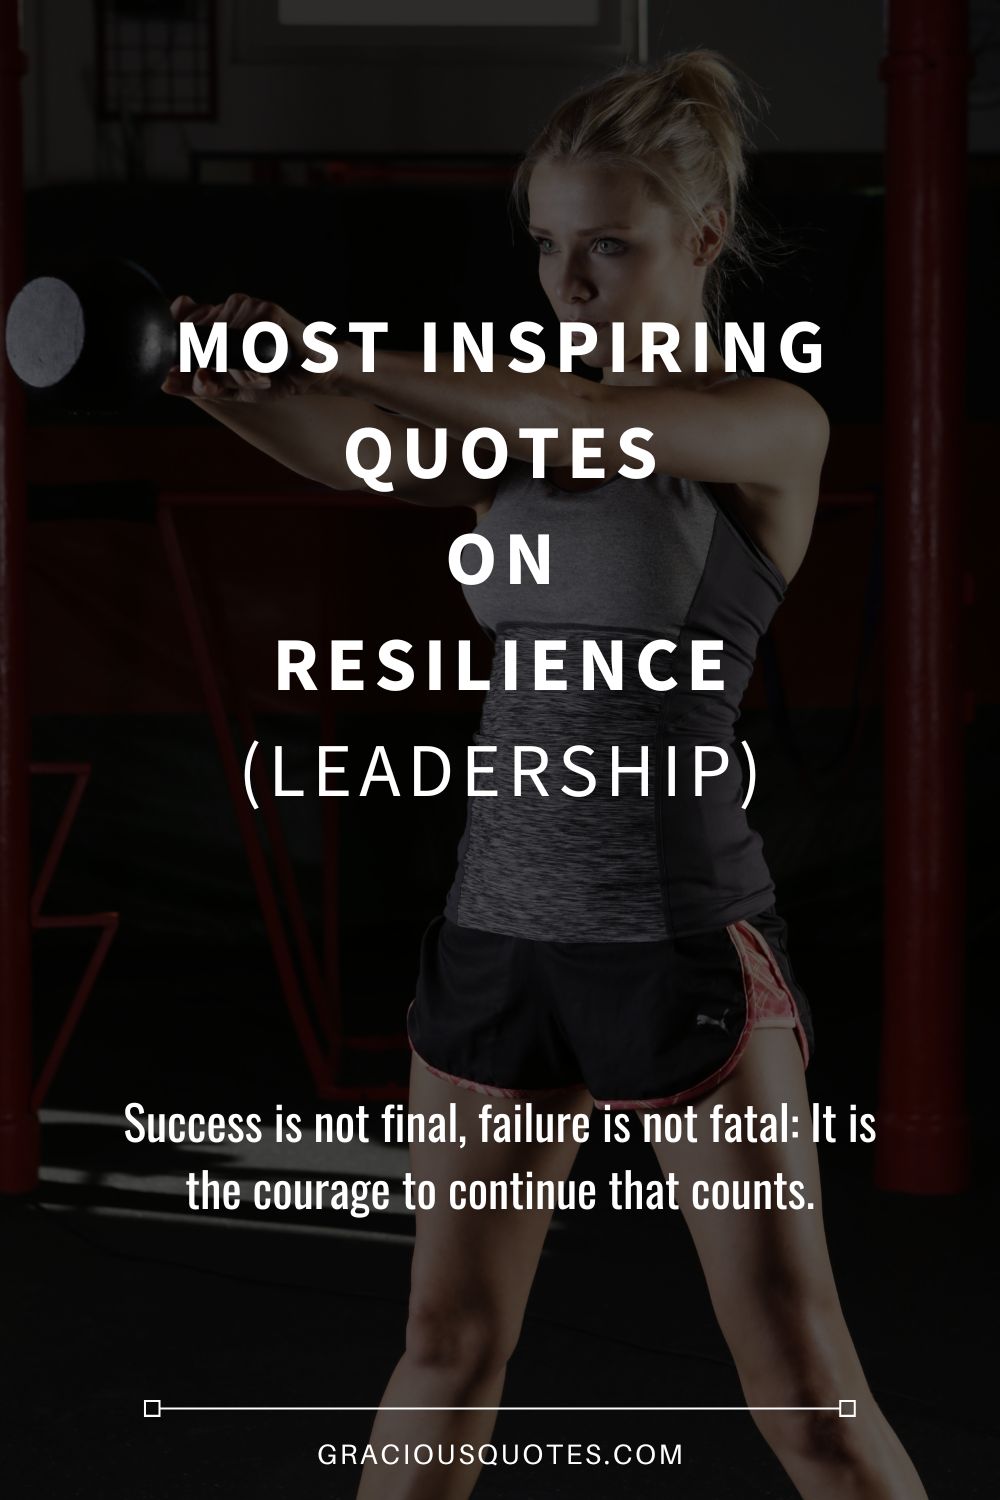 Most Inspiring Quotes on Resilience (LEADERSHIP) - Gracious Quotes